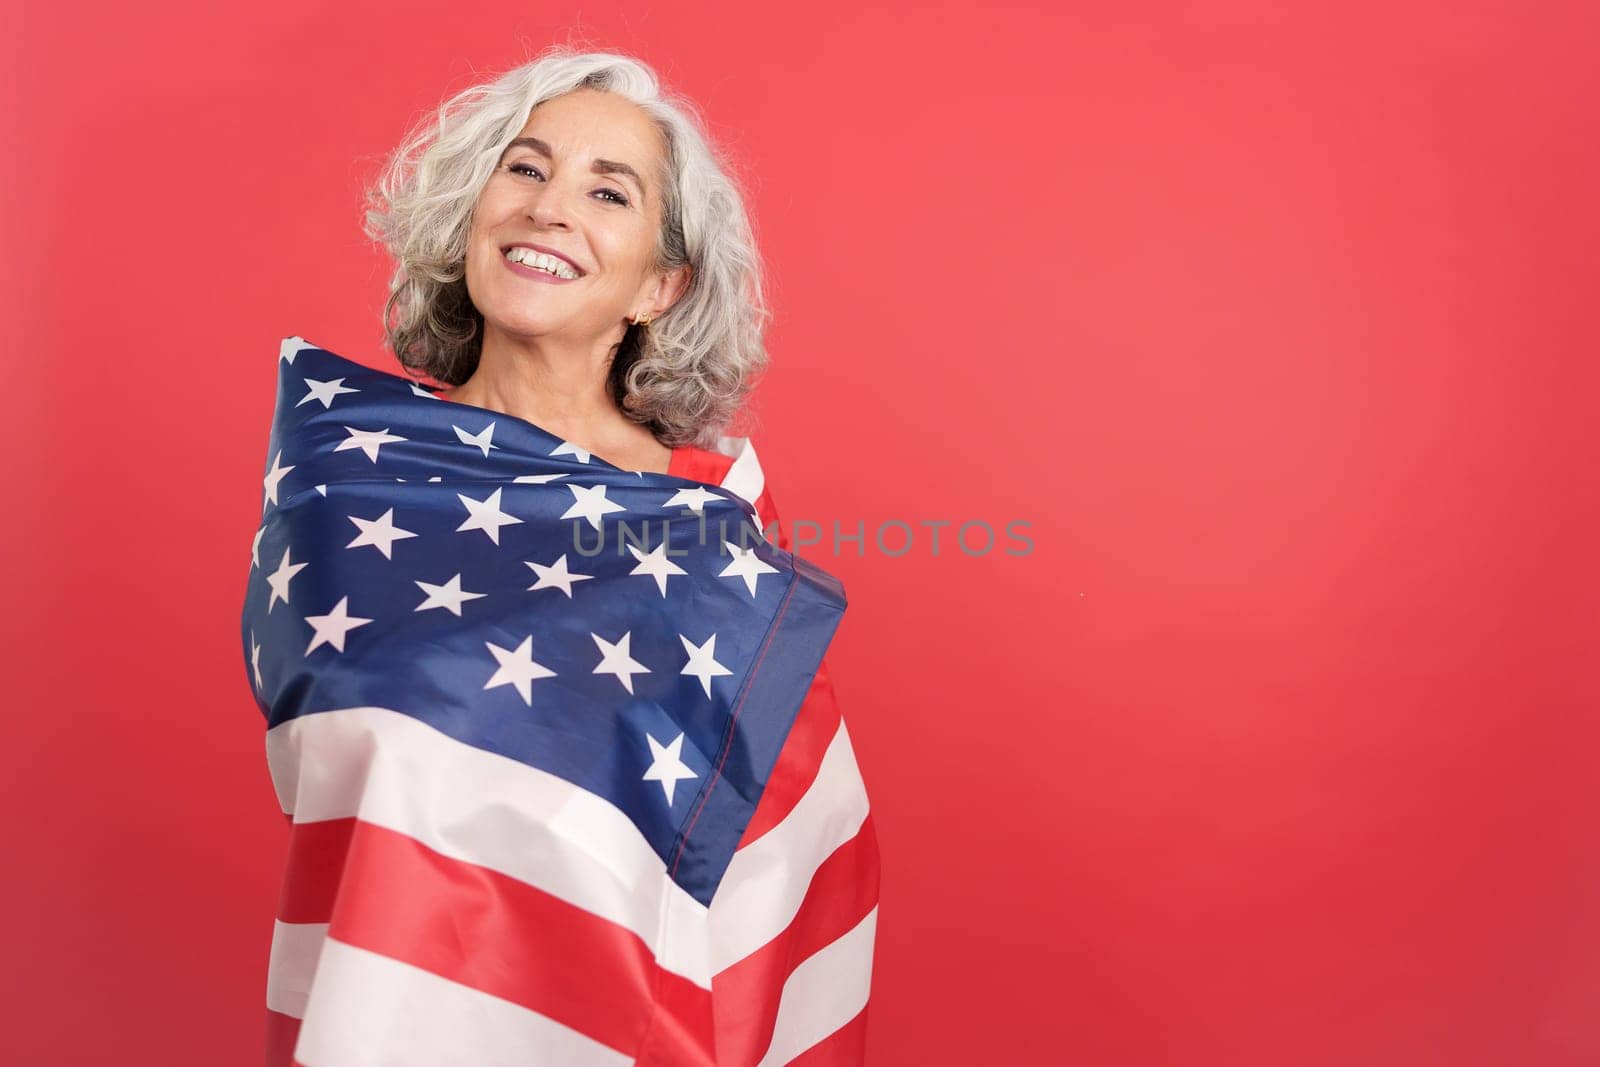 Studio portrait with red background of a smiley woman wrapping with a north america national flag